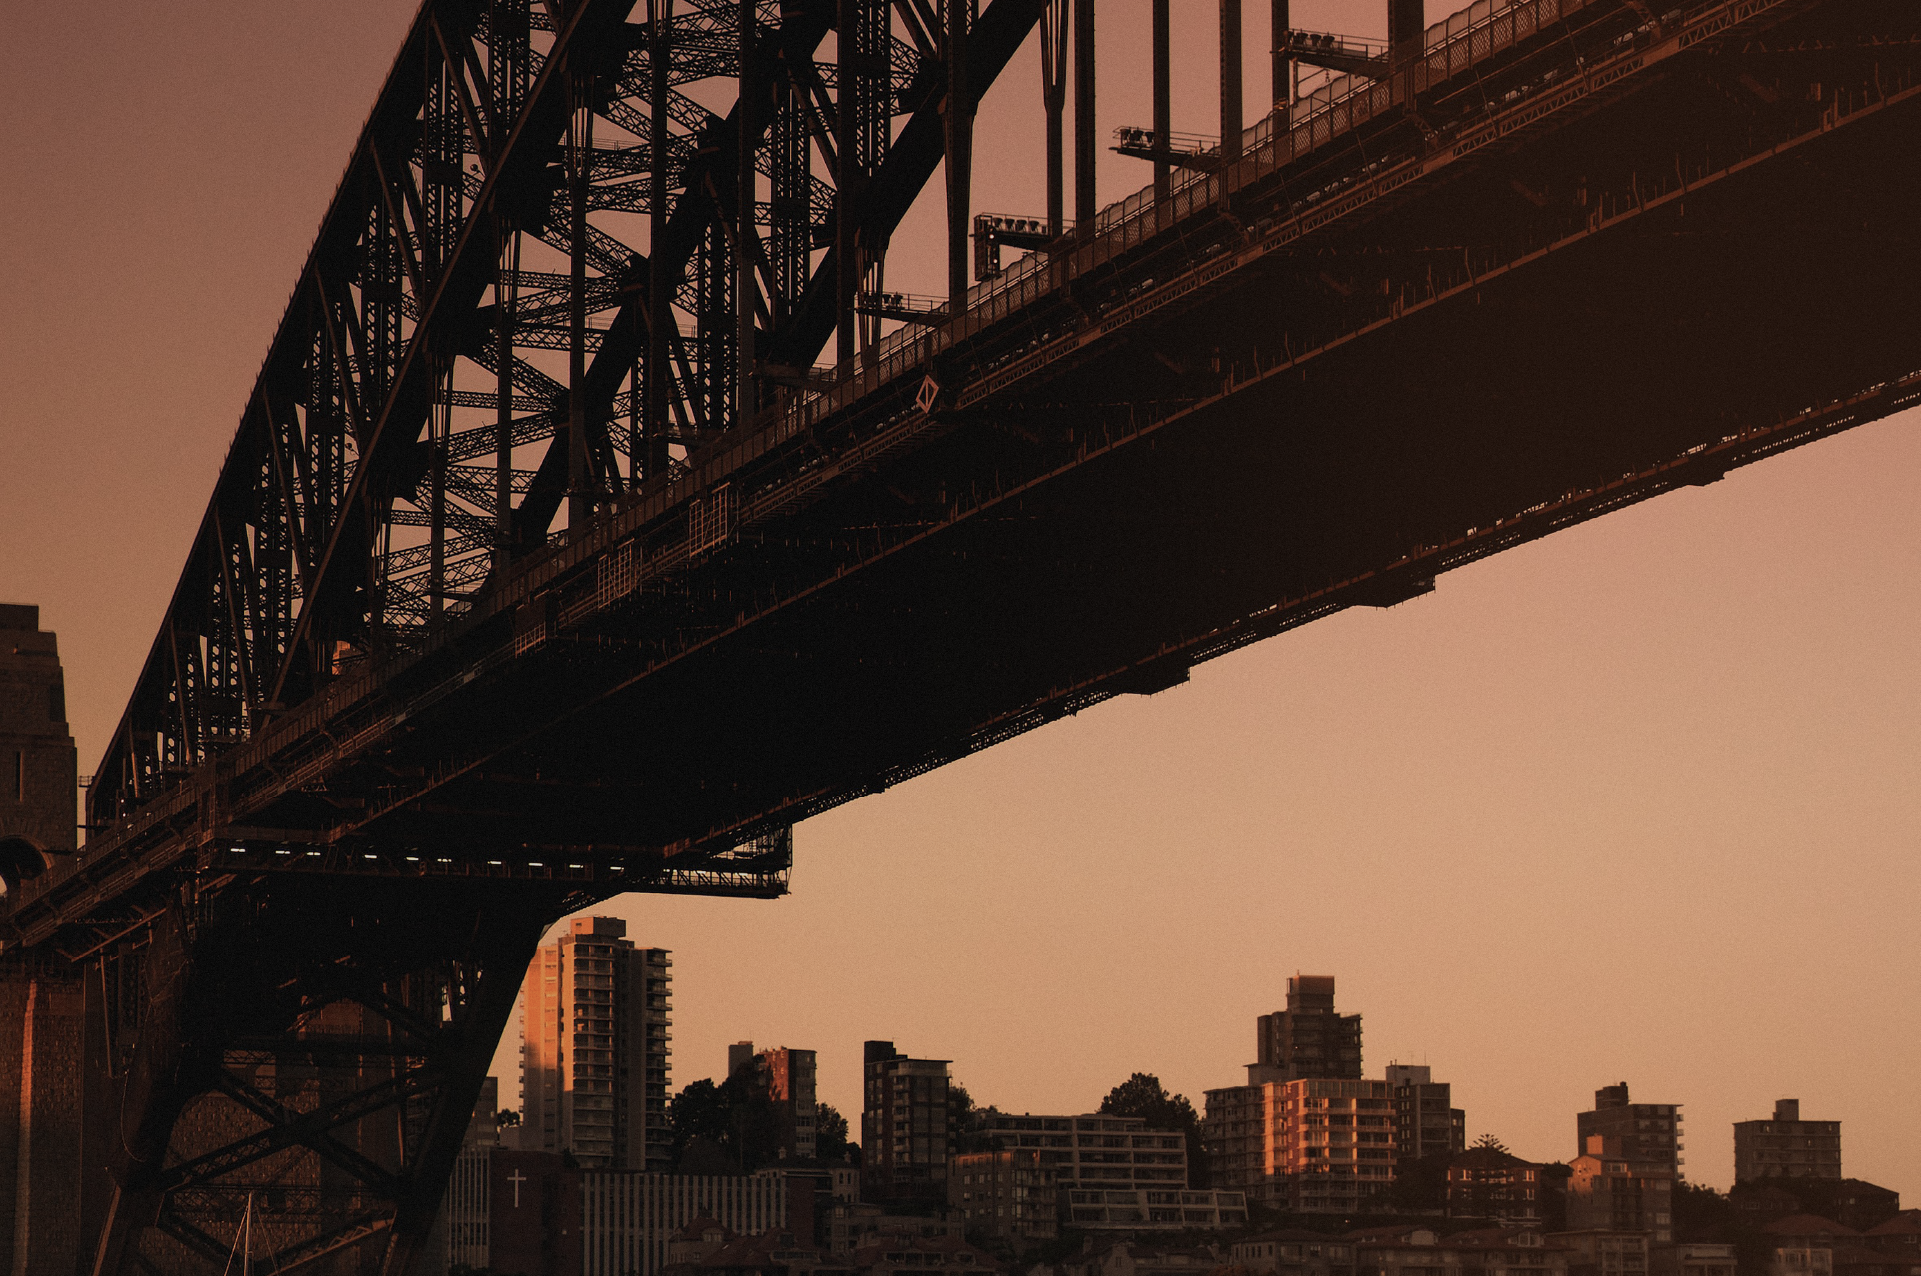 The Sydney Harbour Bridge during sunset looking back over the North Shore